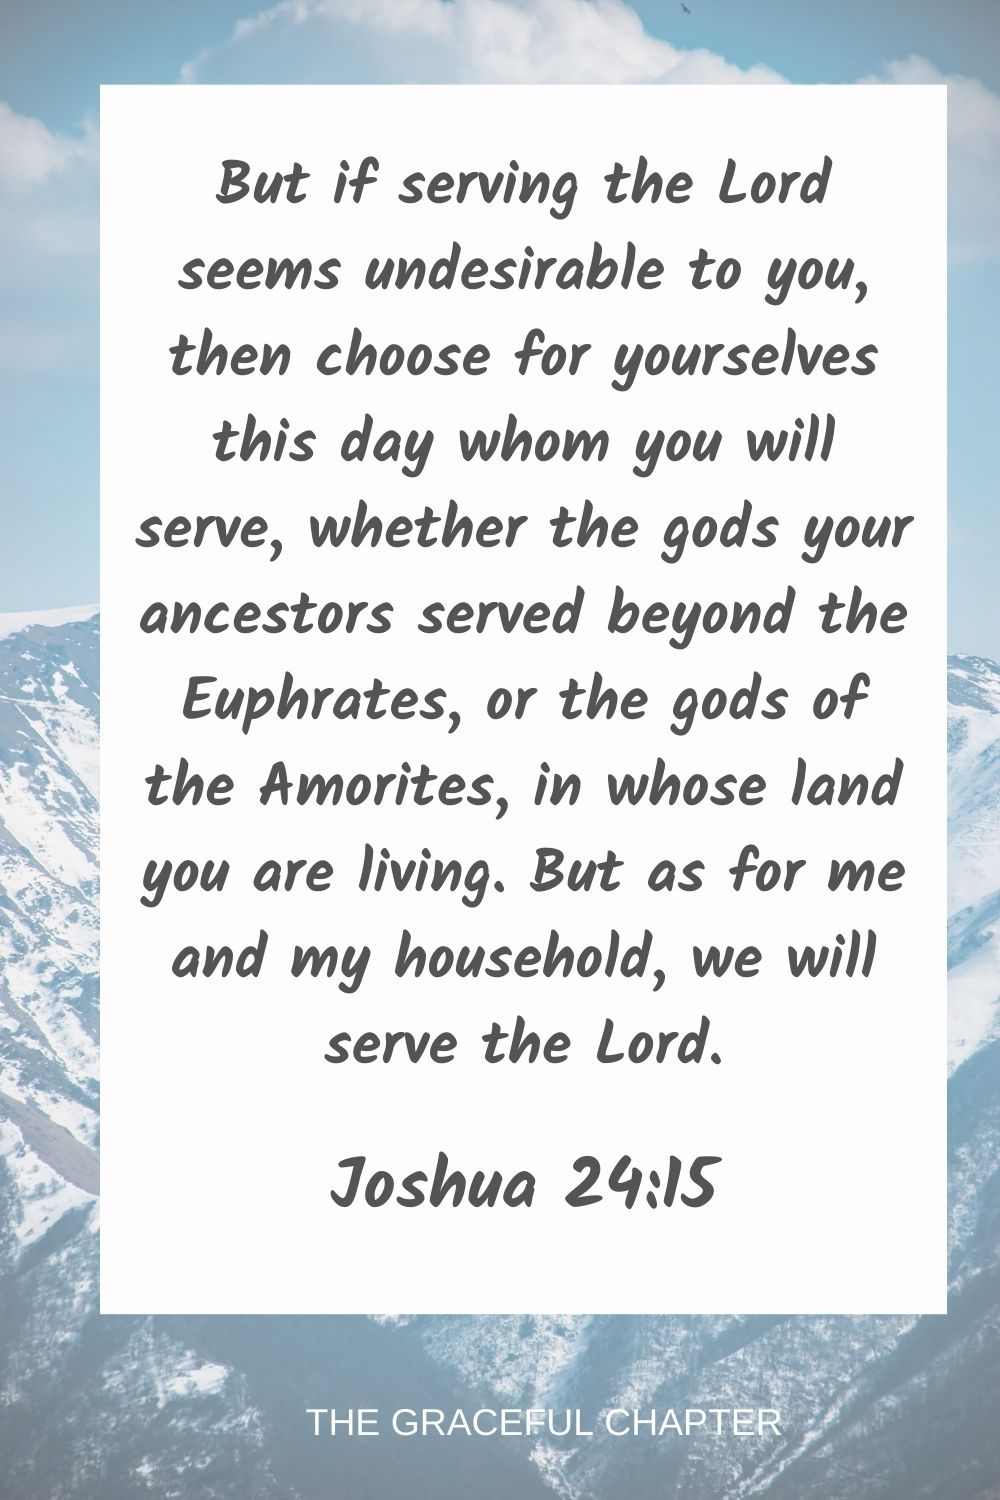 But if serving the Lord seems undesirable to you, then choose for yourselves this day whom you will serve, whether the gods your ancestors served beyond the Euphrates, or the gods of the Amorites, in whose land you are living. But as for me and my household, we will serve the Lord. Joshua 24:15